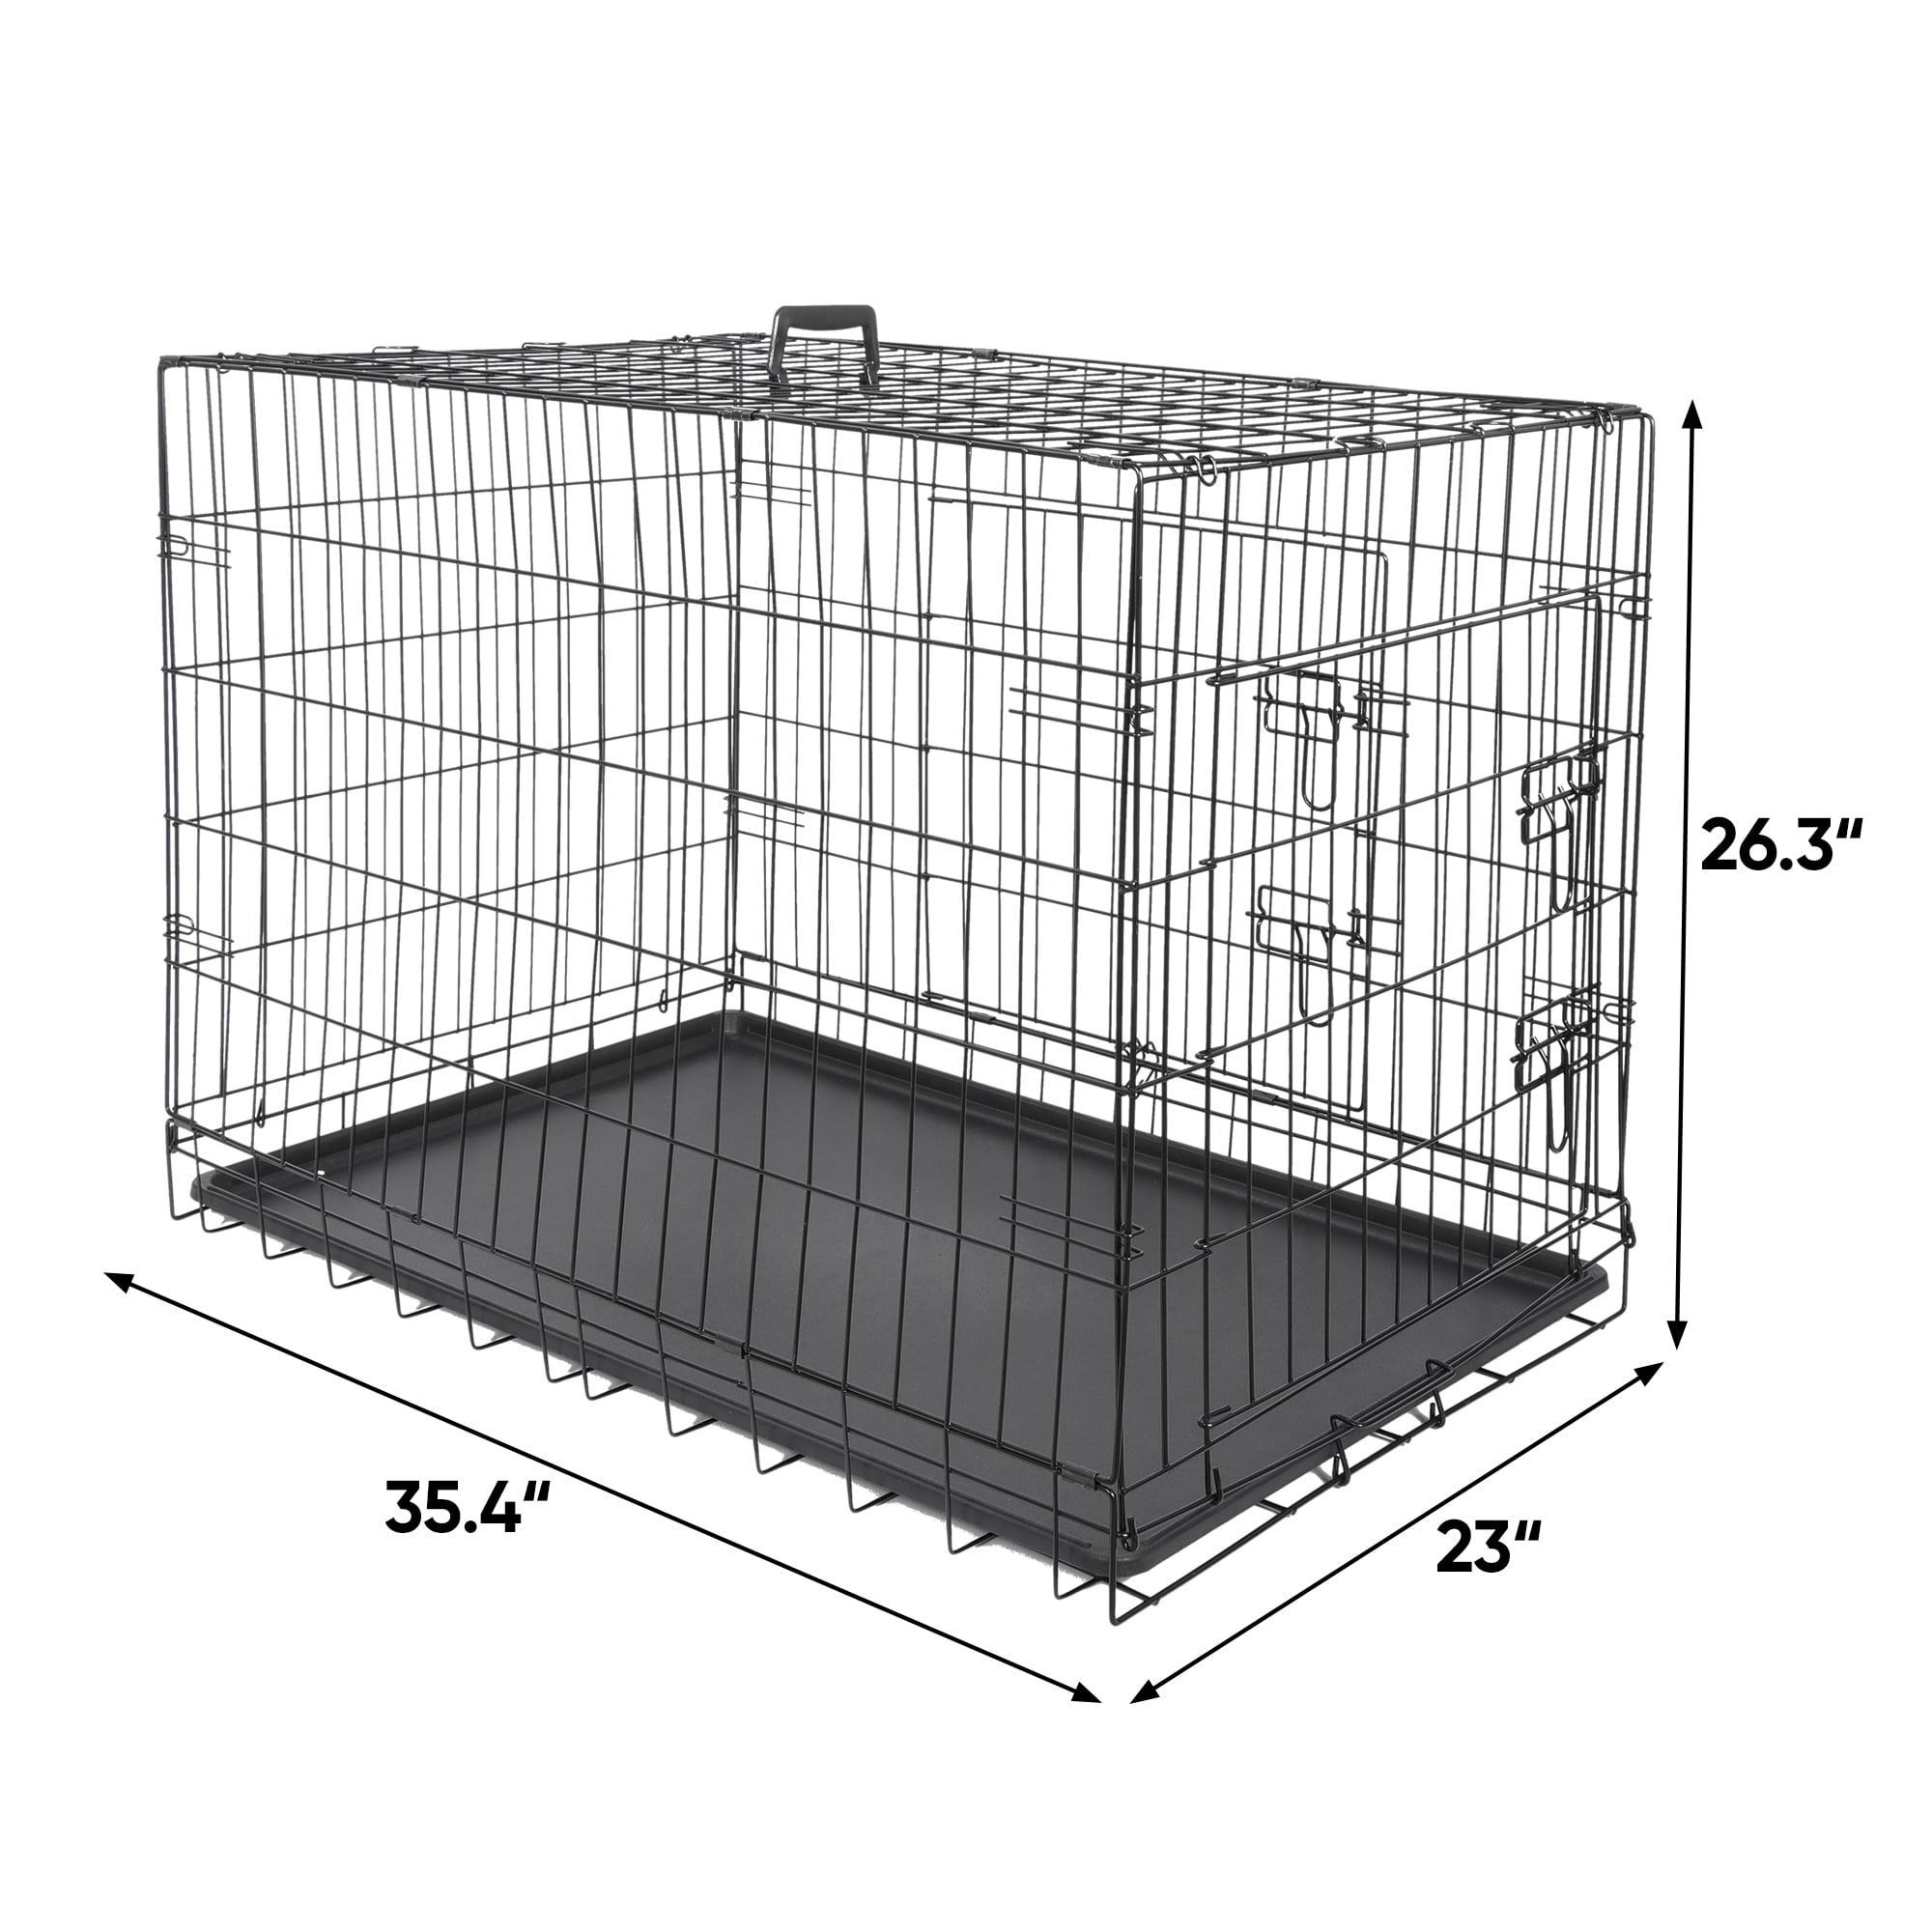 ZENY 30 inch Dog Crate Double Door Folding Metal Dog or Pet Crate Kennel with Tray and Handle 